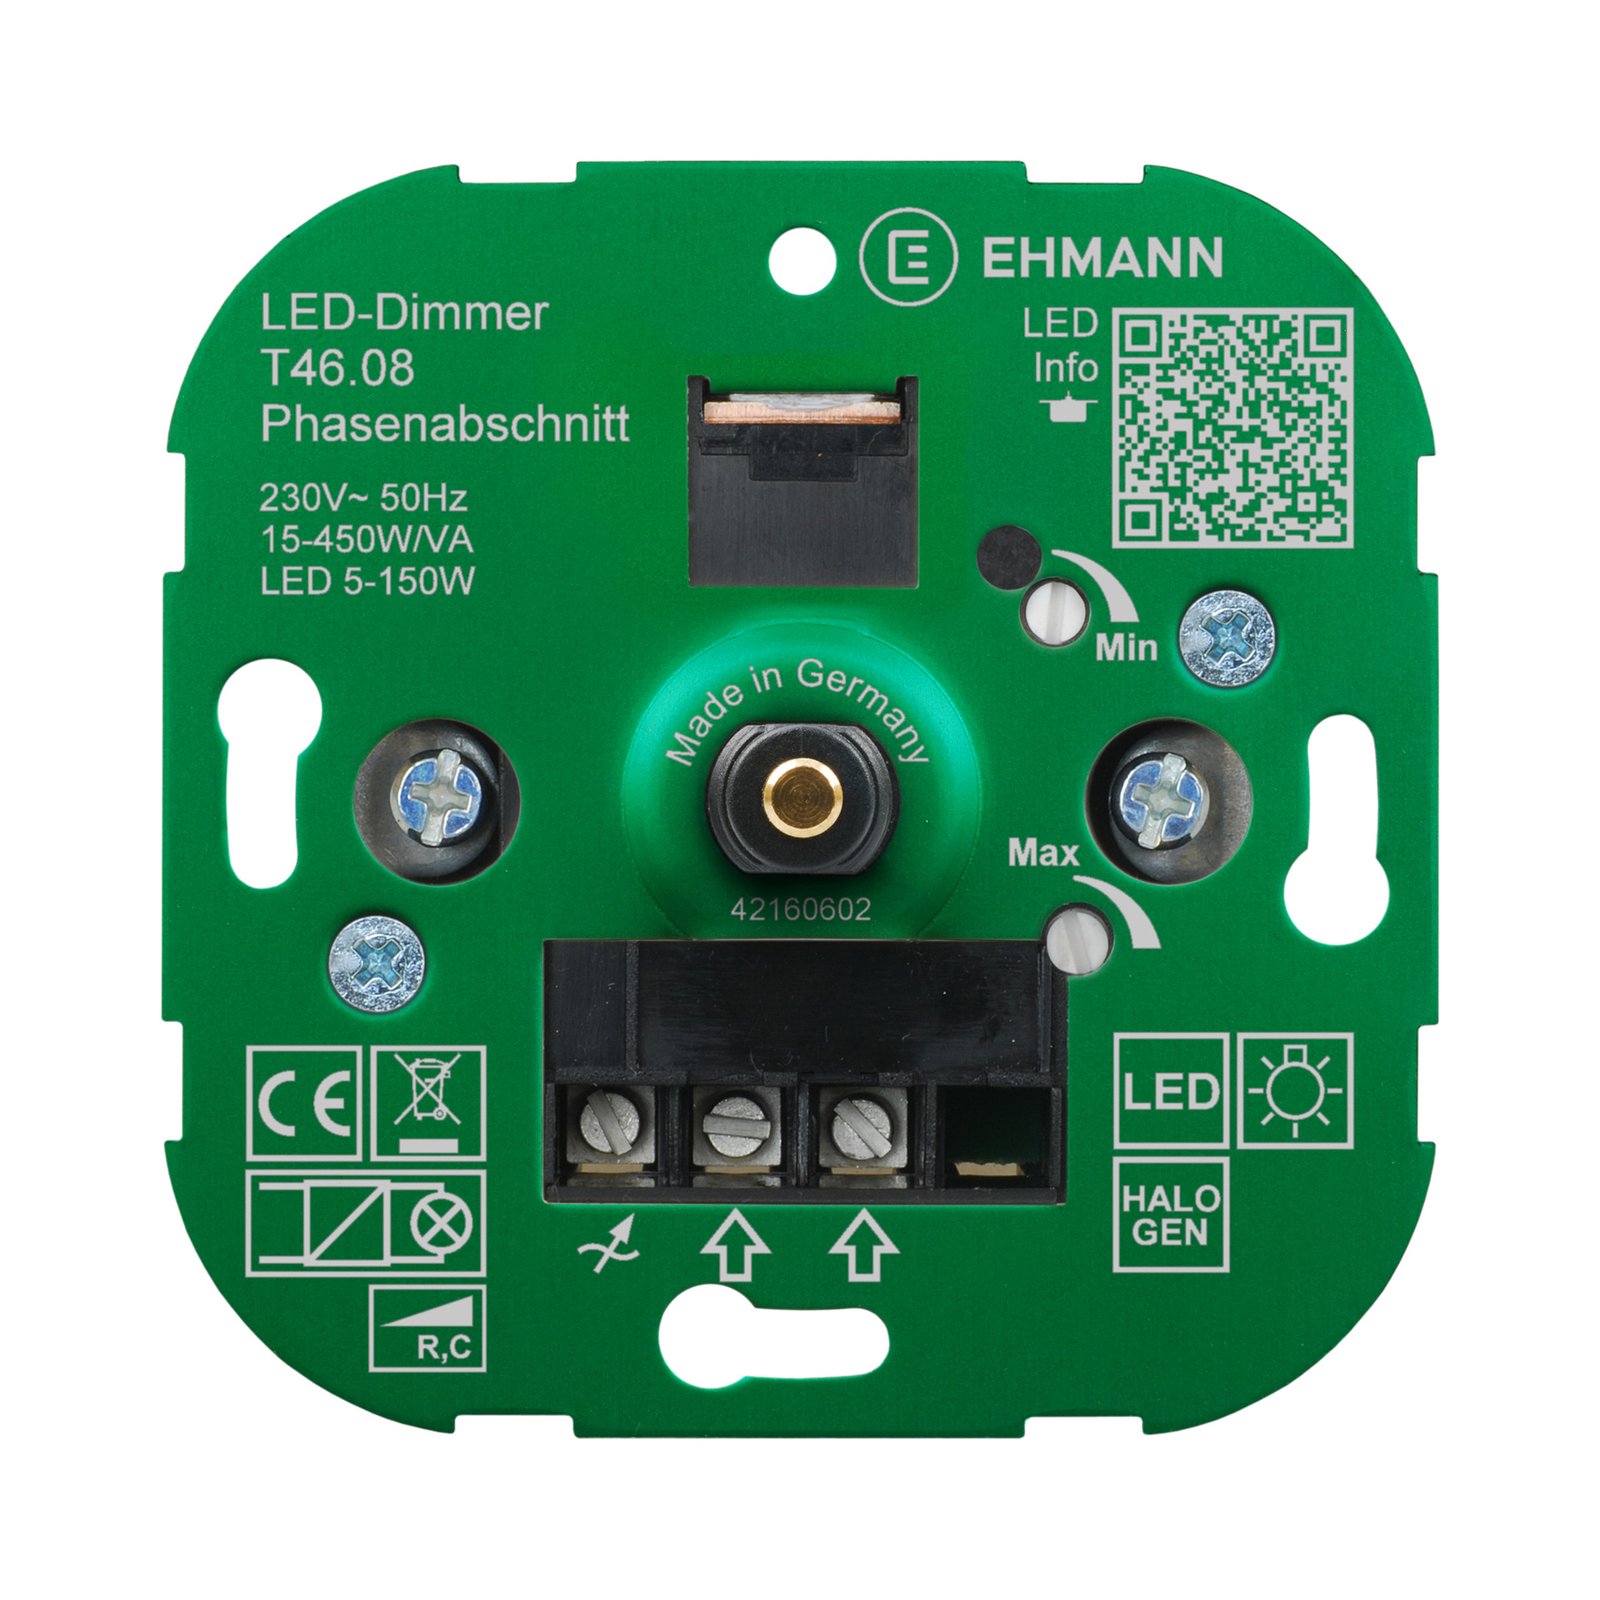 EHMANN T46 dimmer LED fase inicial, 15 - 450 W